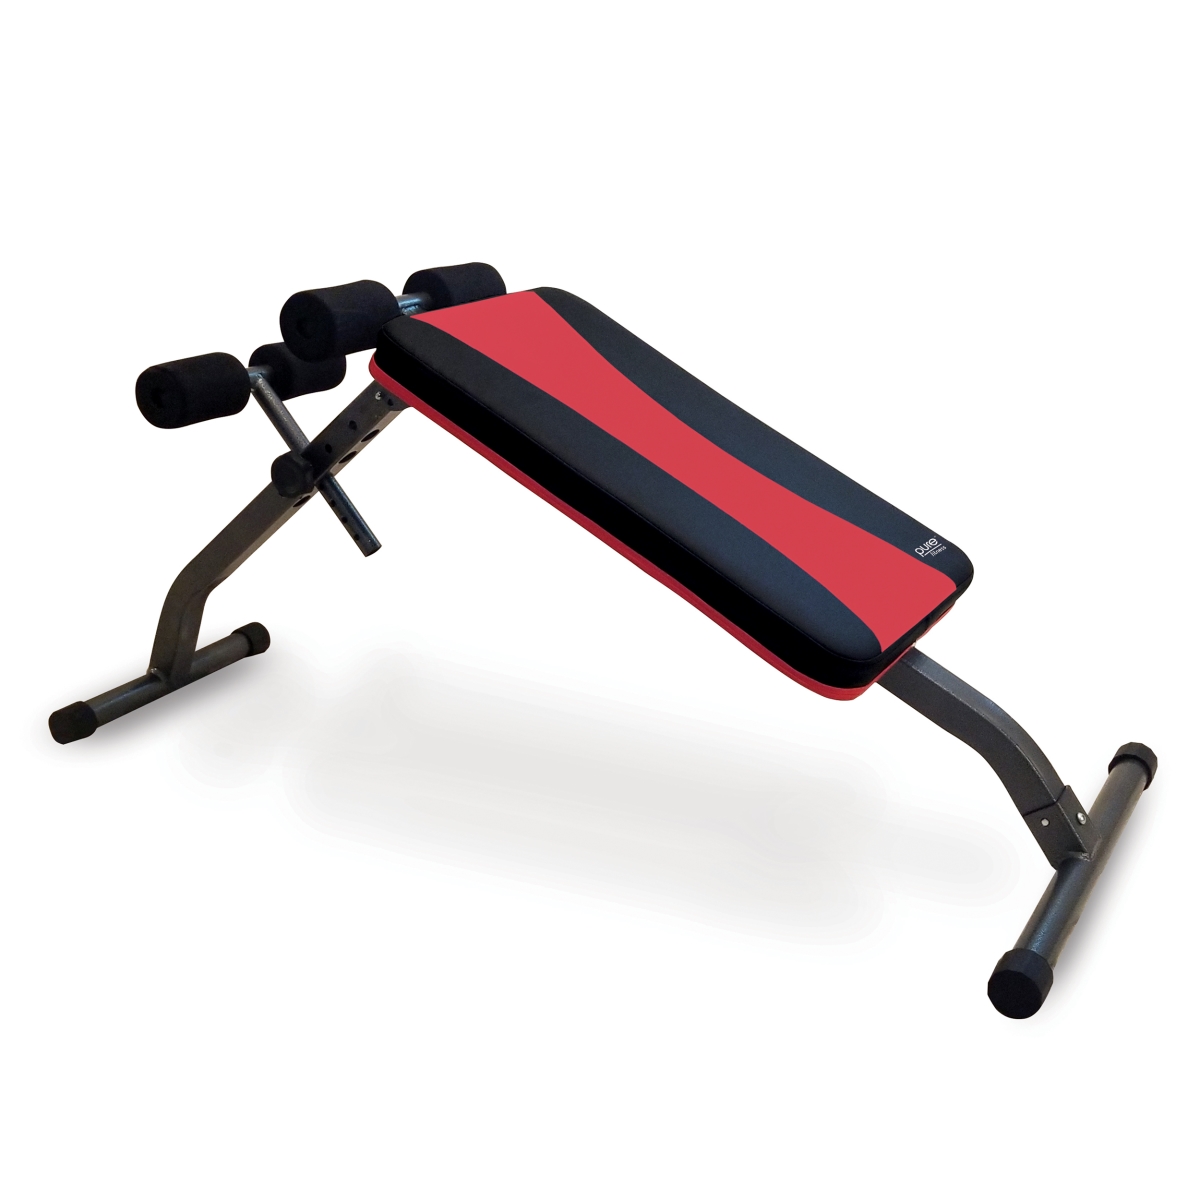 Global Quality Brands 8742AB Pure Fitness Adjustable AB Bench